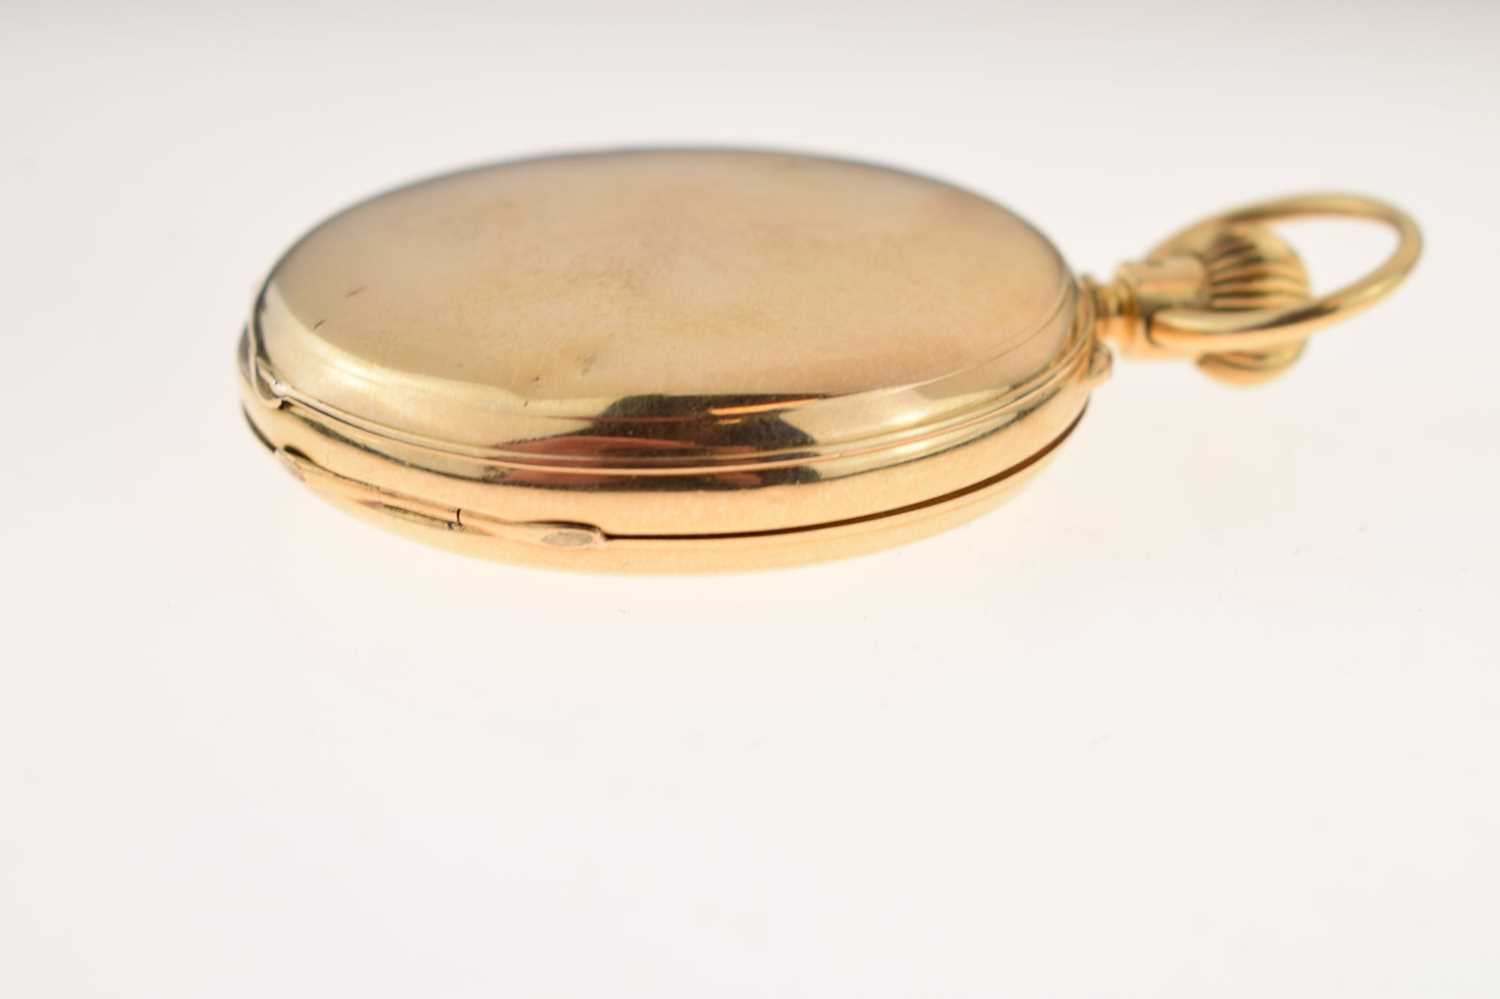 Barraud & Lunds, London - 18ct gold hunter pocket watch - Image 8 of 12